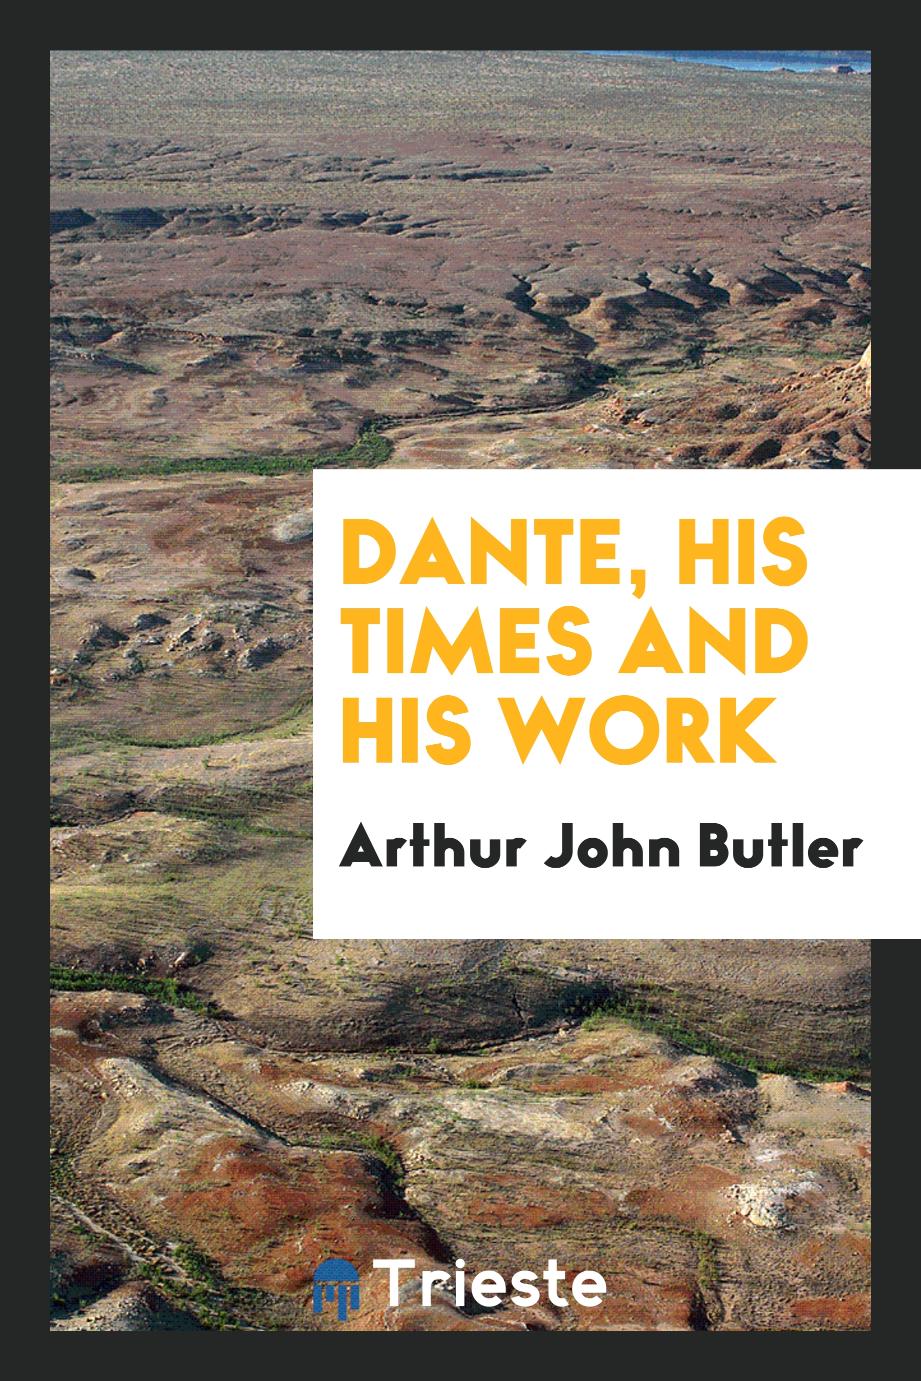 Dante, his times and his work